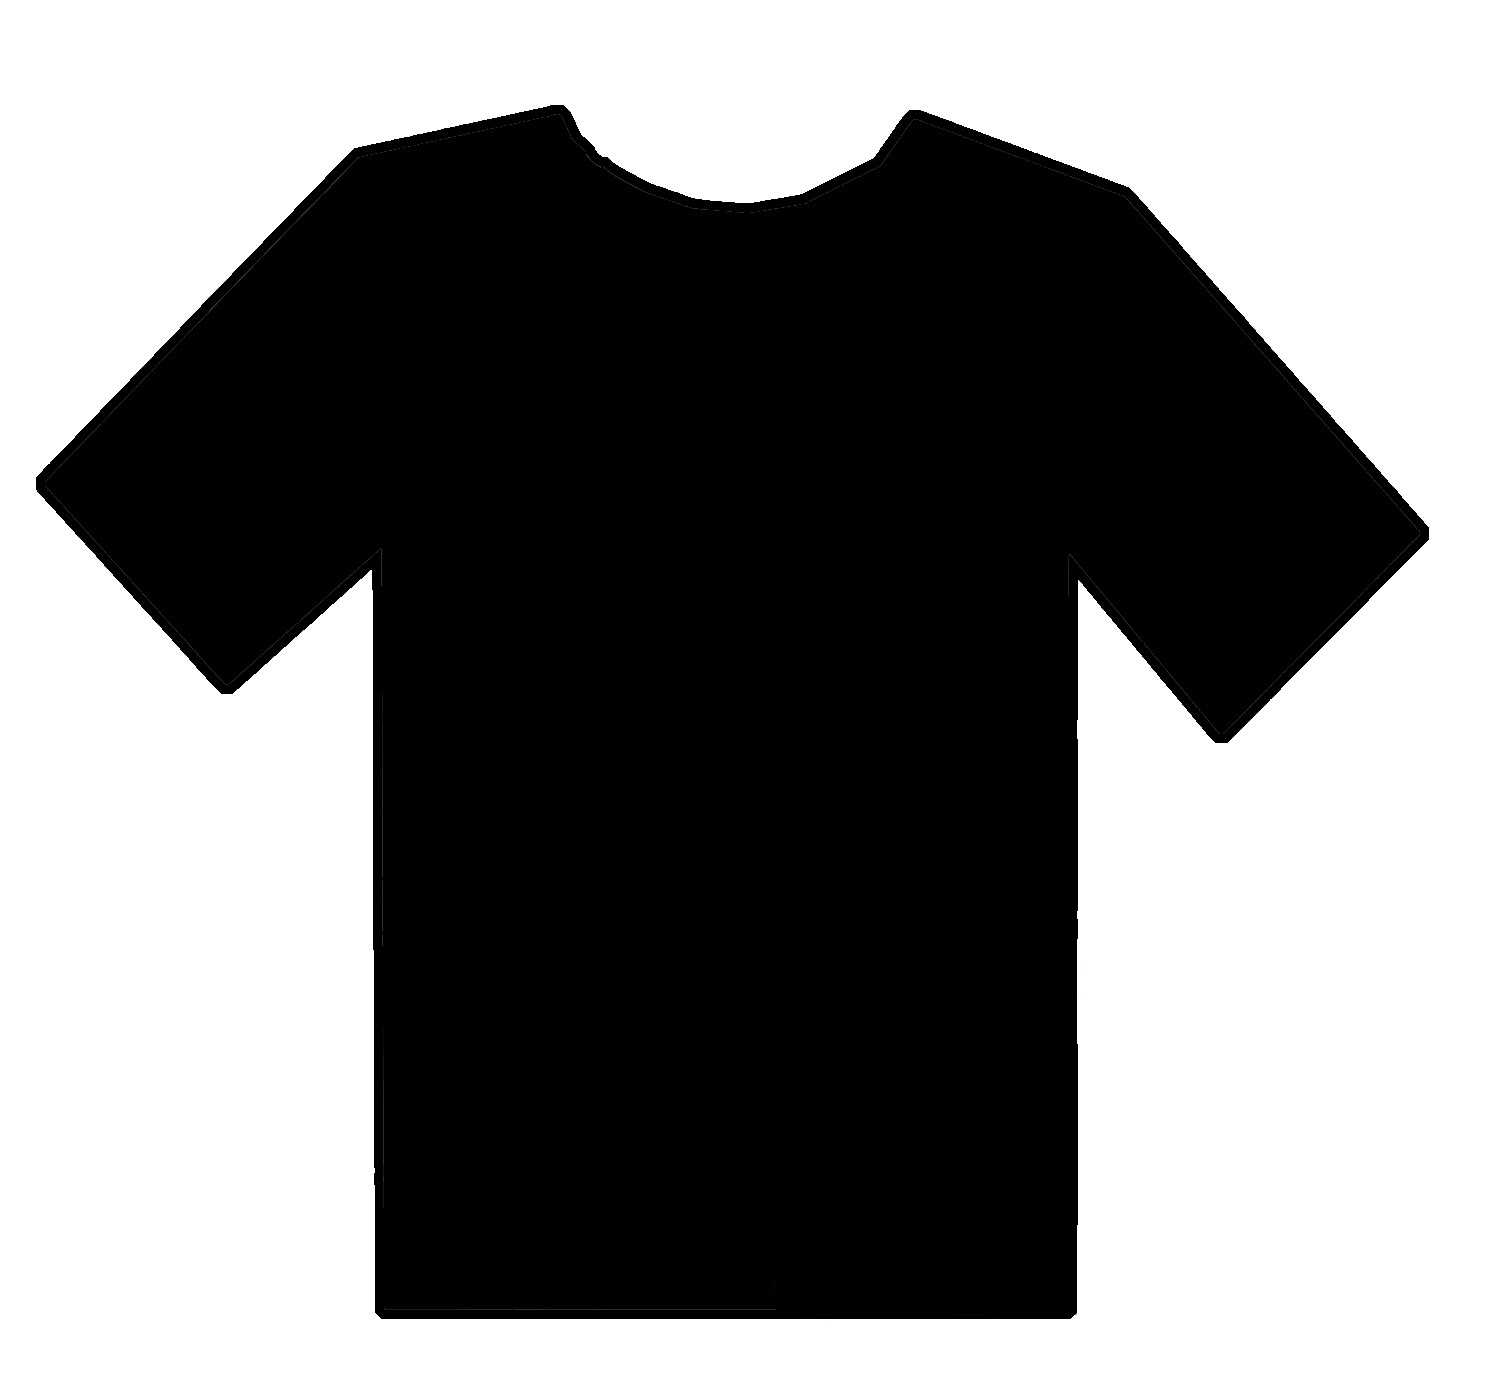 Blank T Shirts Template. Bessed Comprintable Tee Template At With Regard To Blank Tshirt Template Pdf